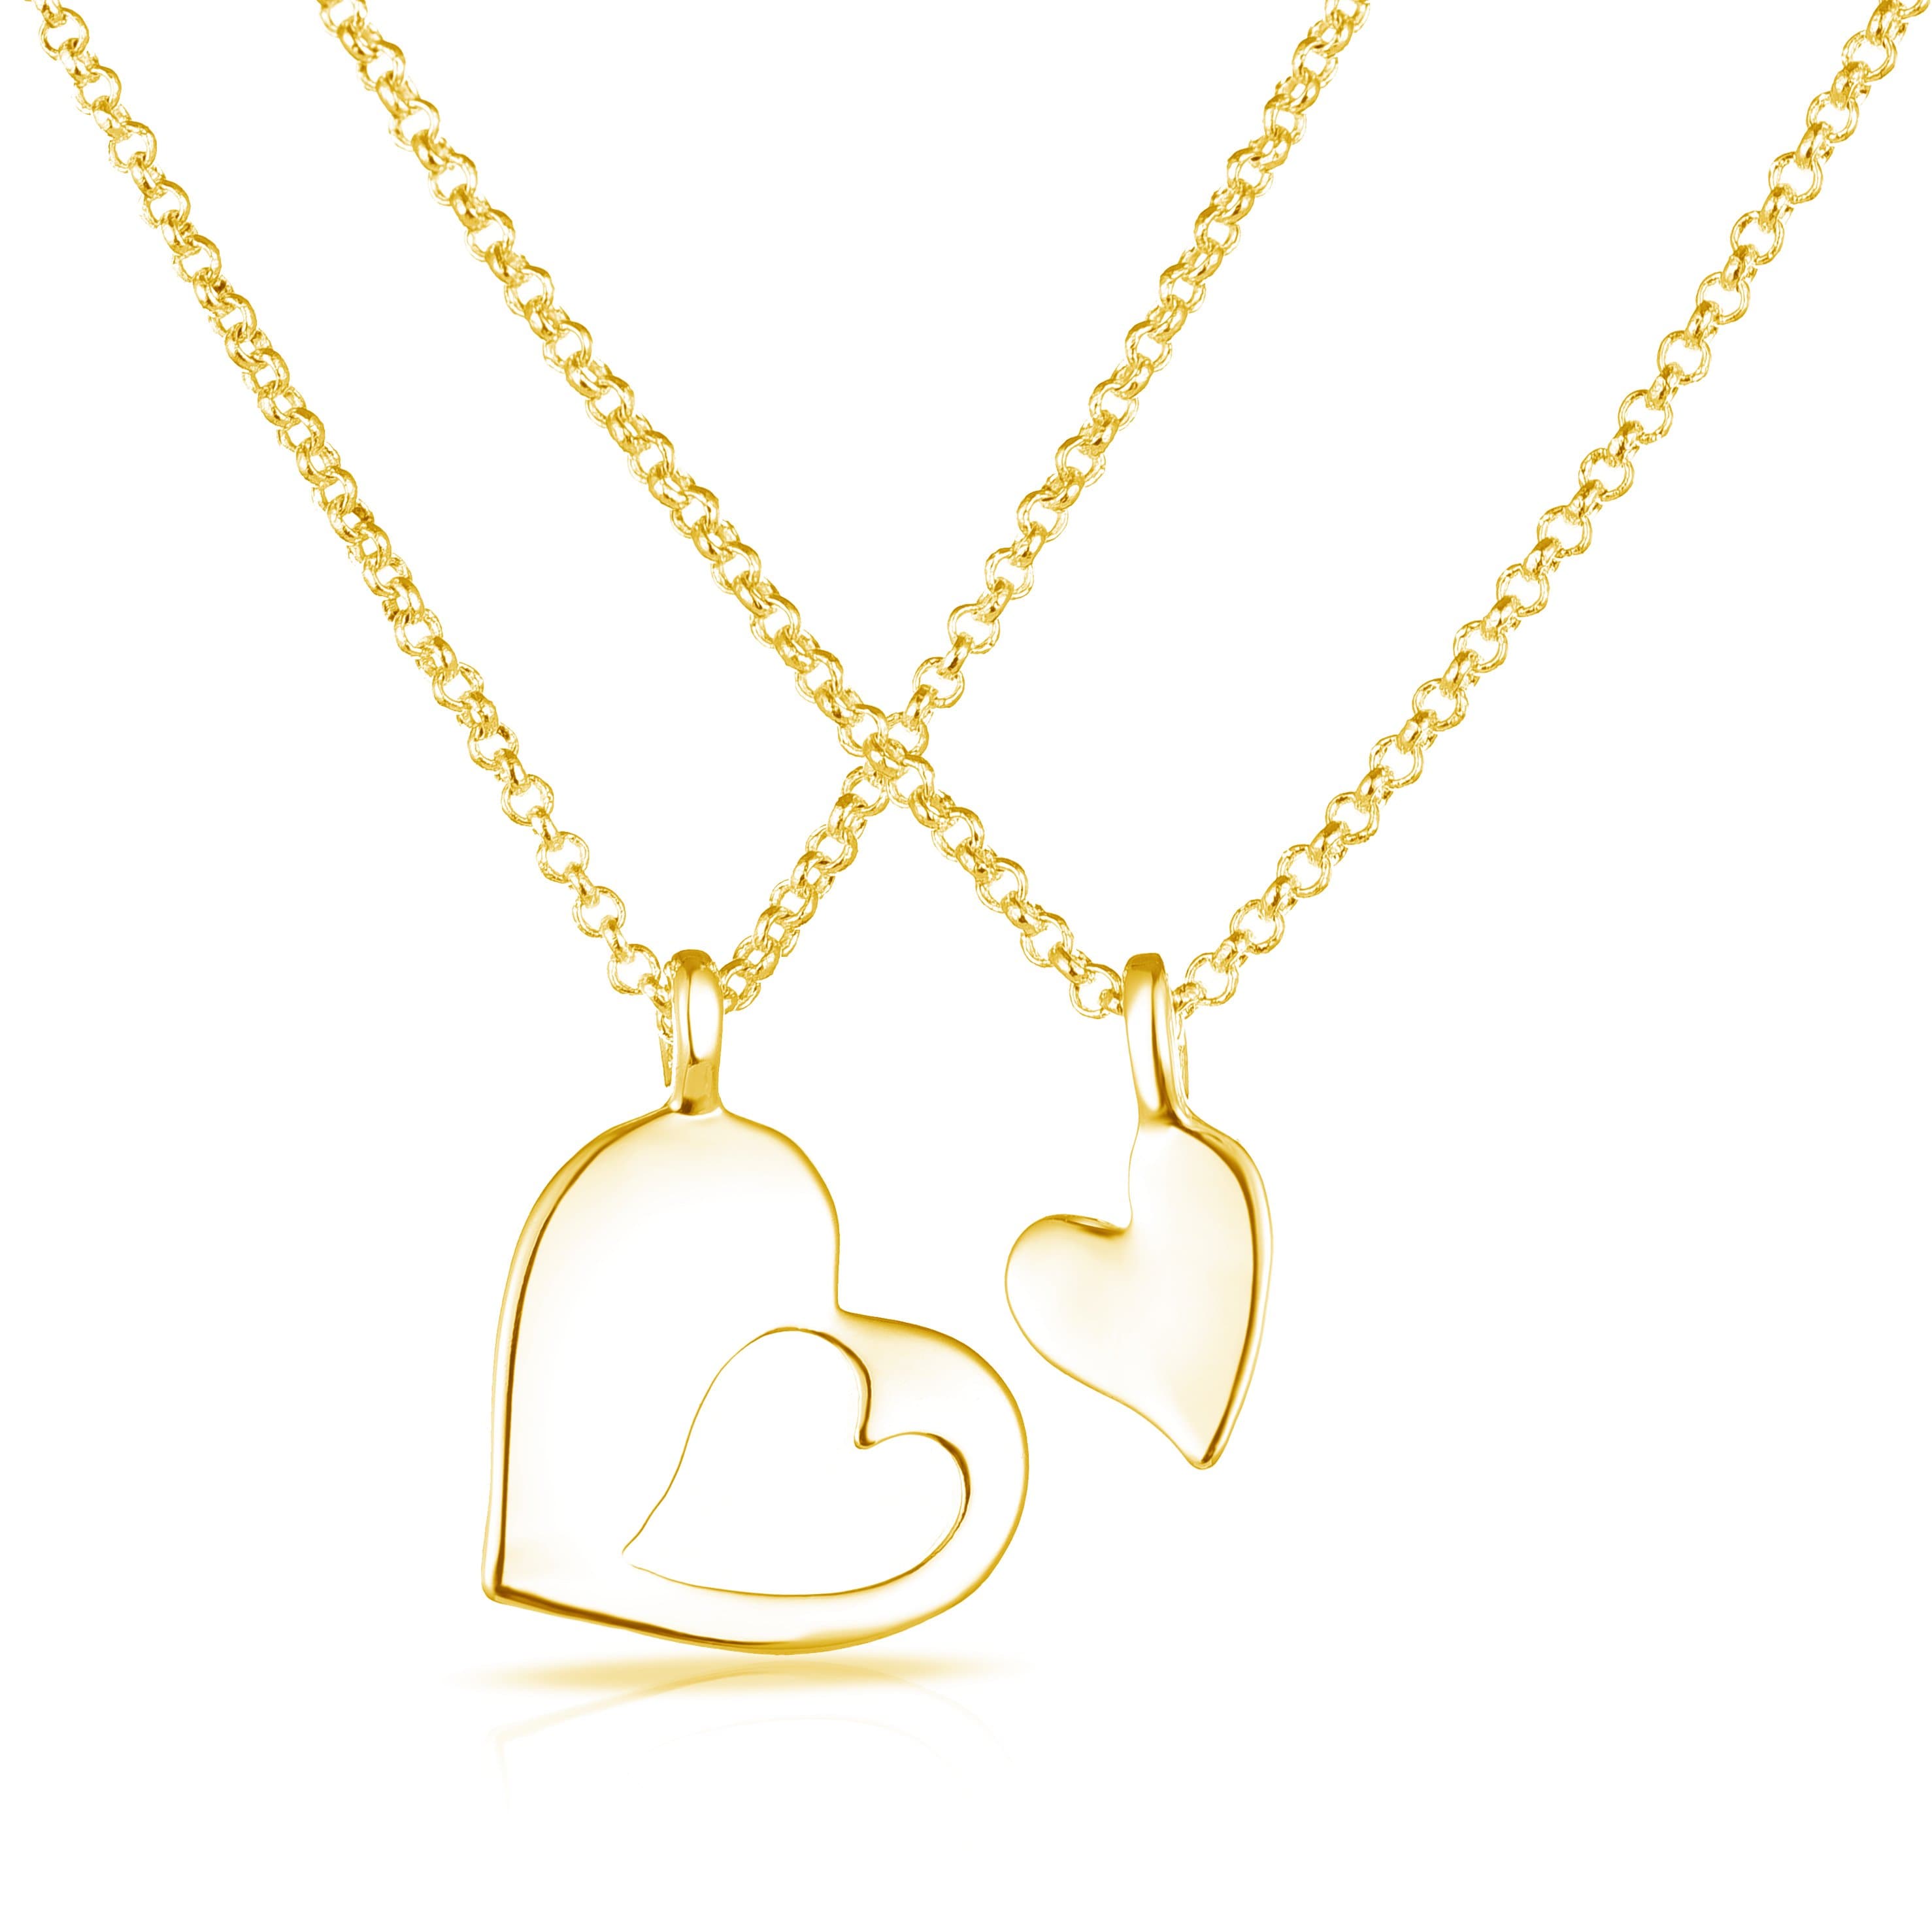 Gold Plated For Me For You Piece of My Heart Necklace Set